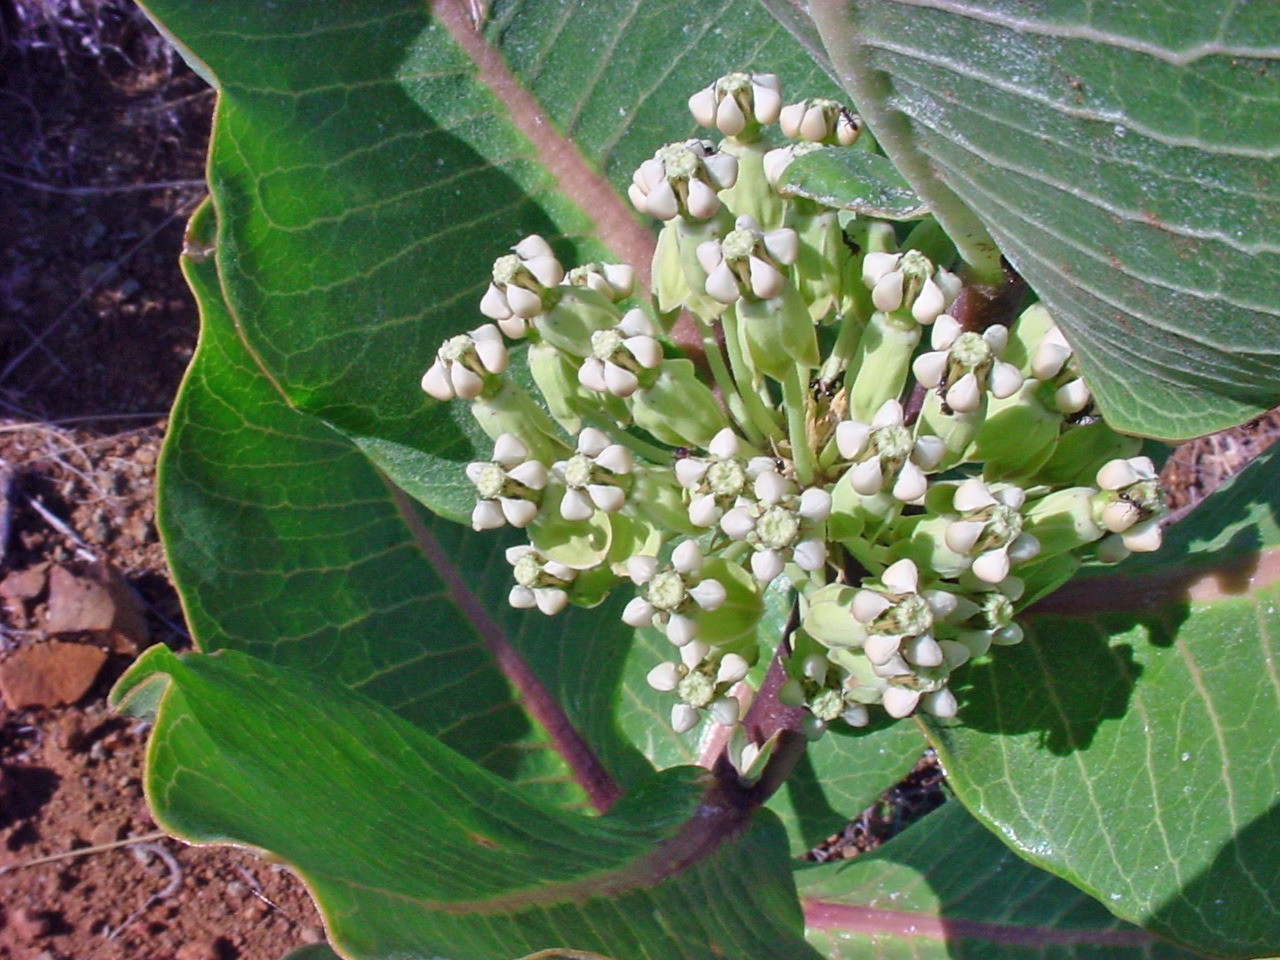 Small white flowers in the foreground; undersides of veined leaves in the background.